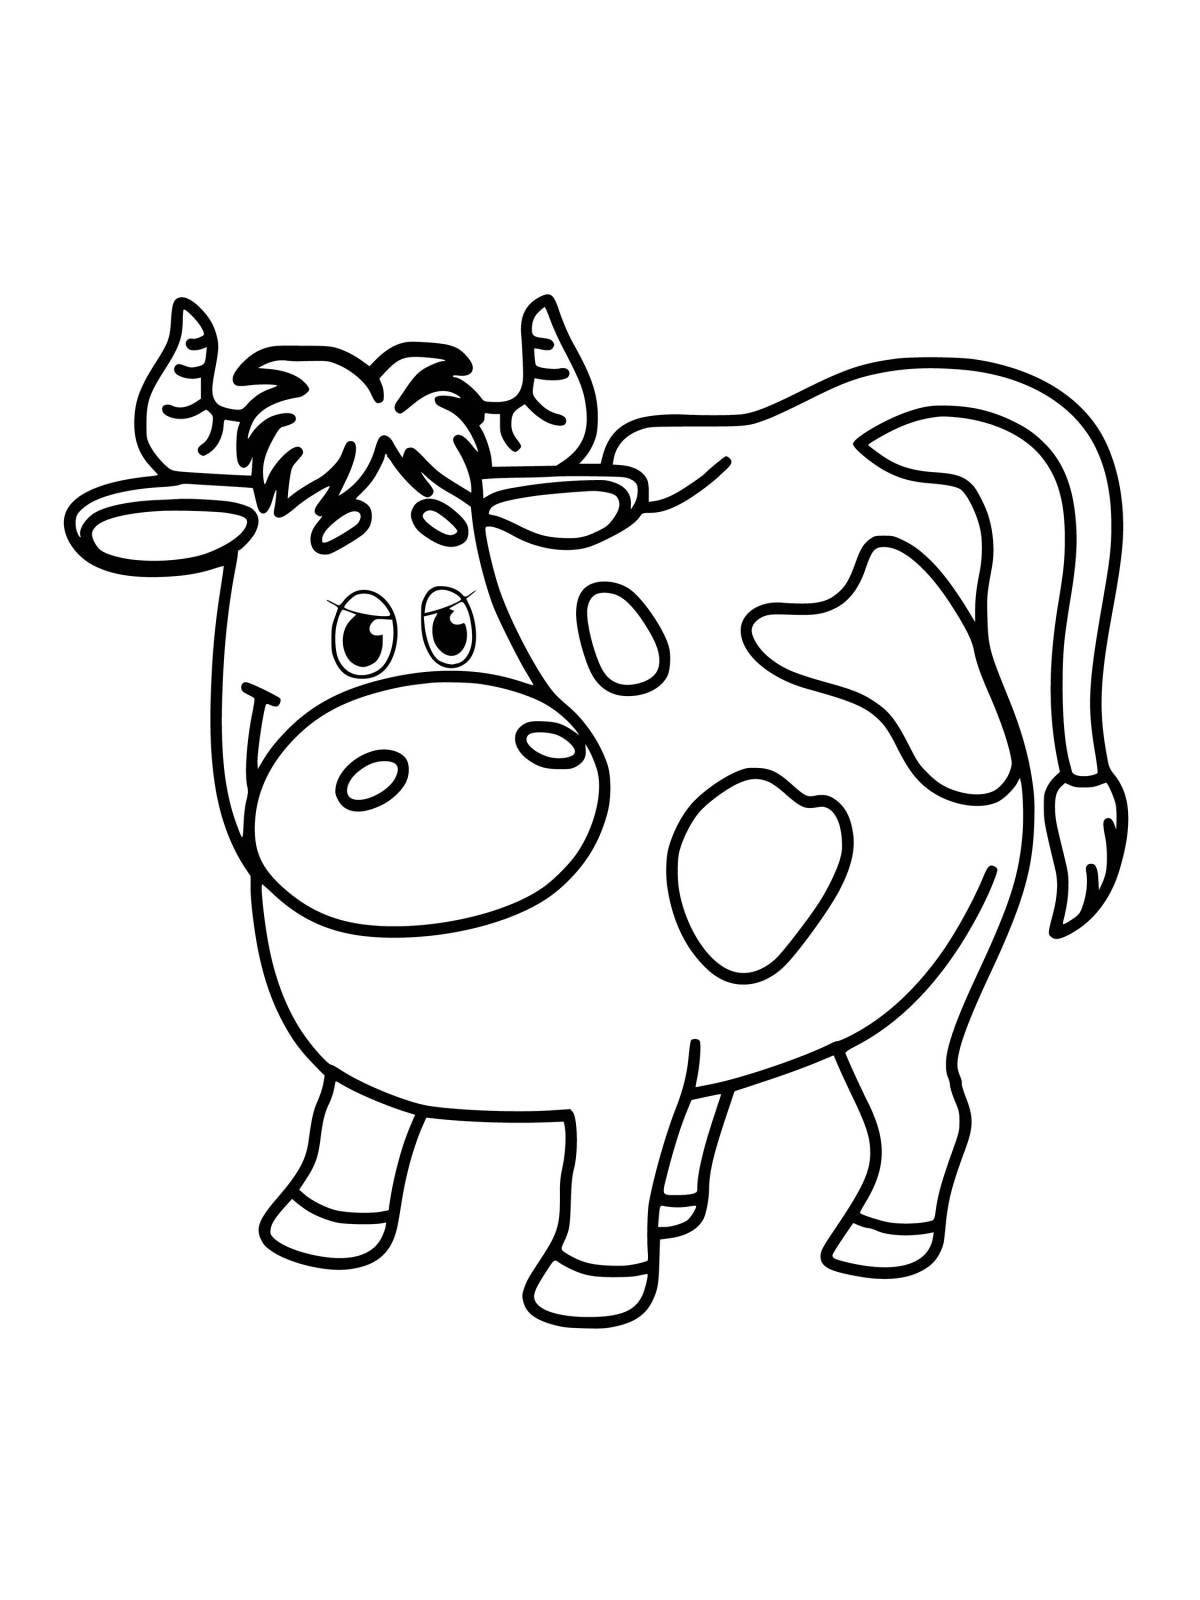 Creative coloring cow for toddlers 2 3 years old